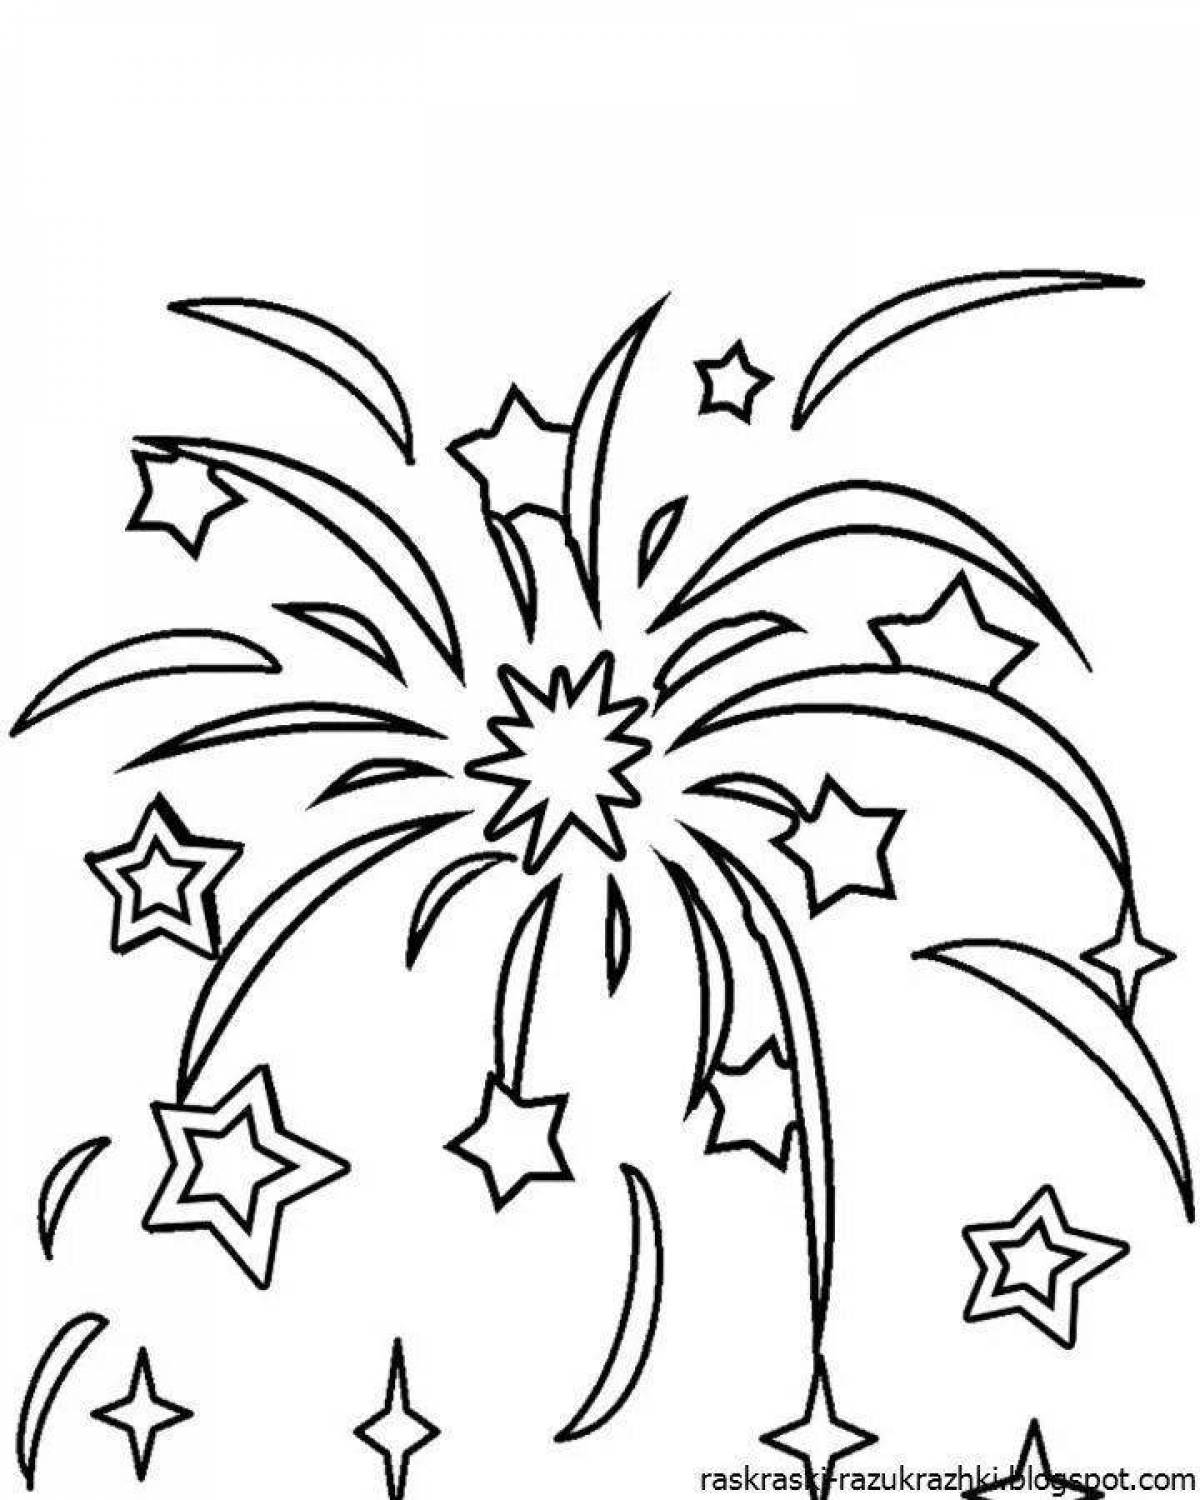 Dramatic fireworks coloring book